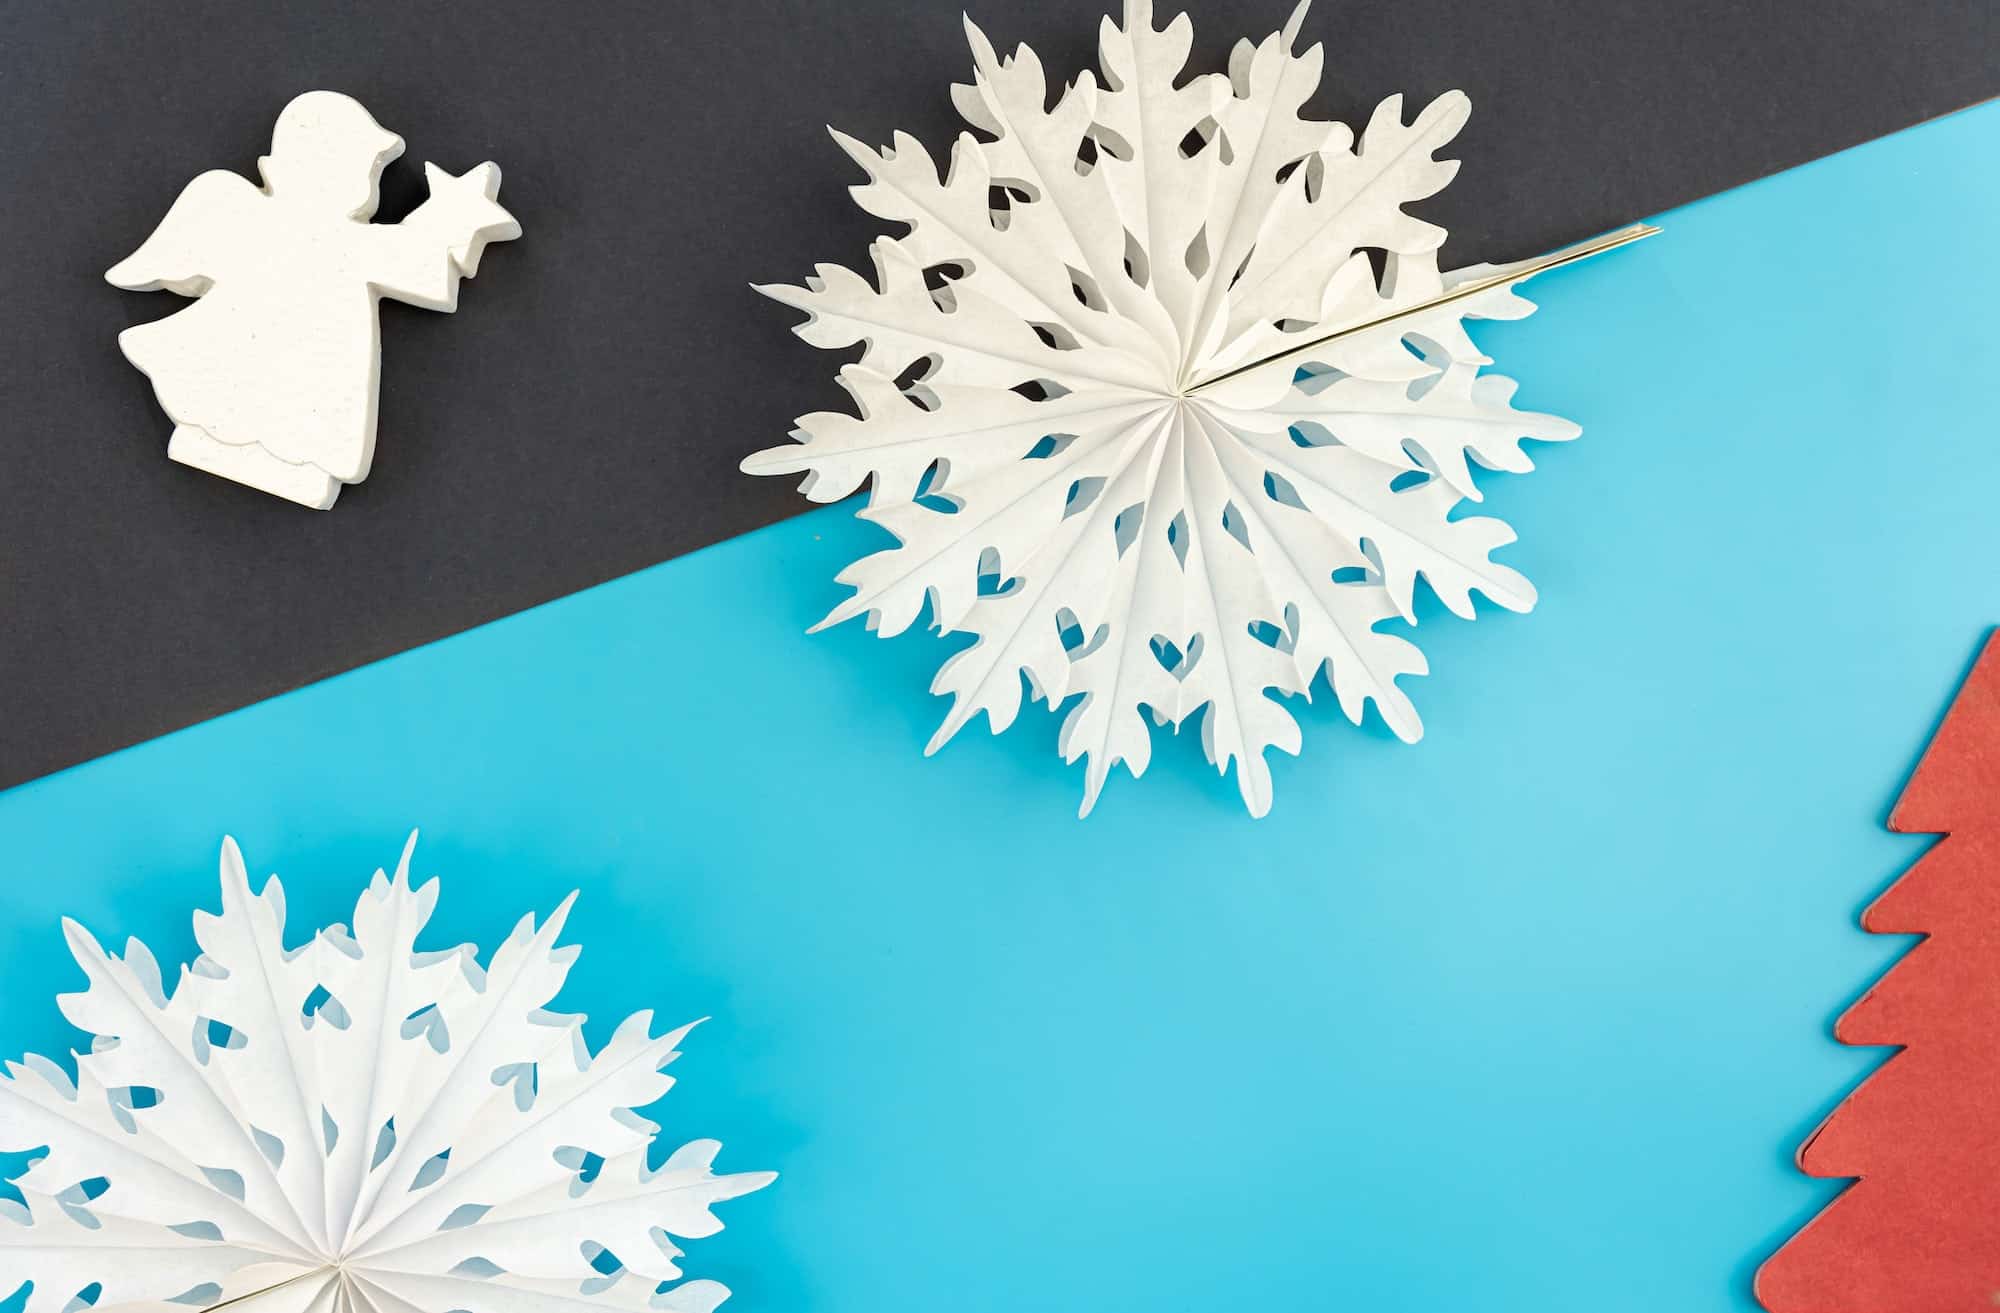 Volumetric paper snowflakes on a colored background, flat lay.